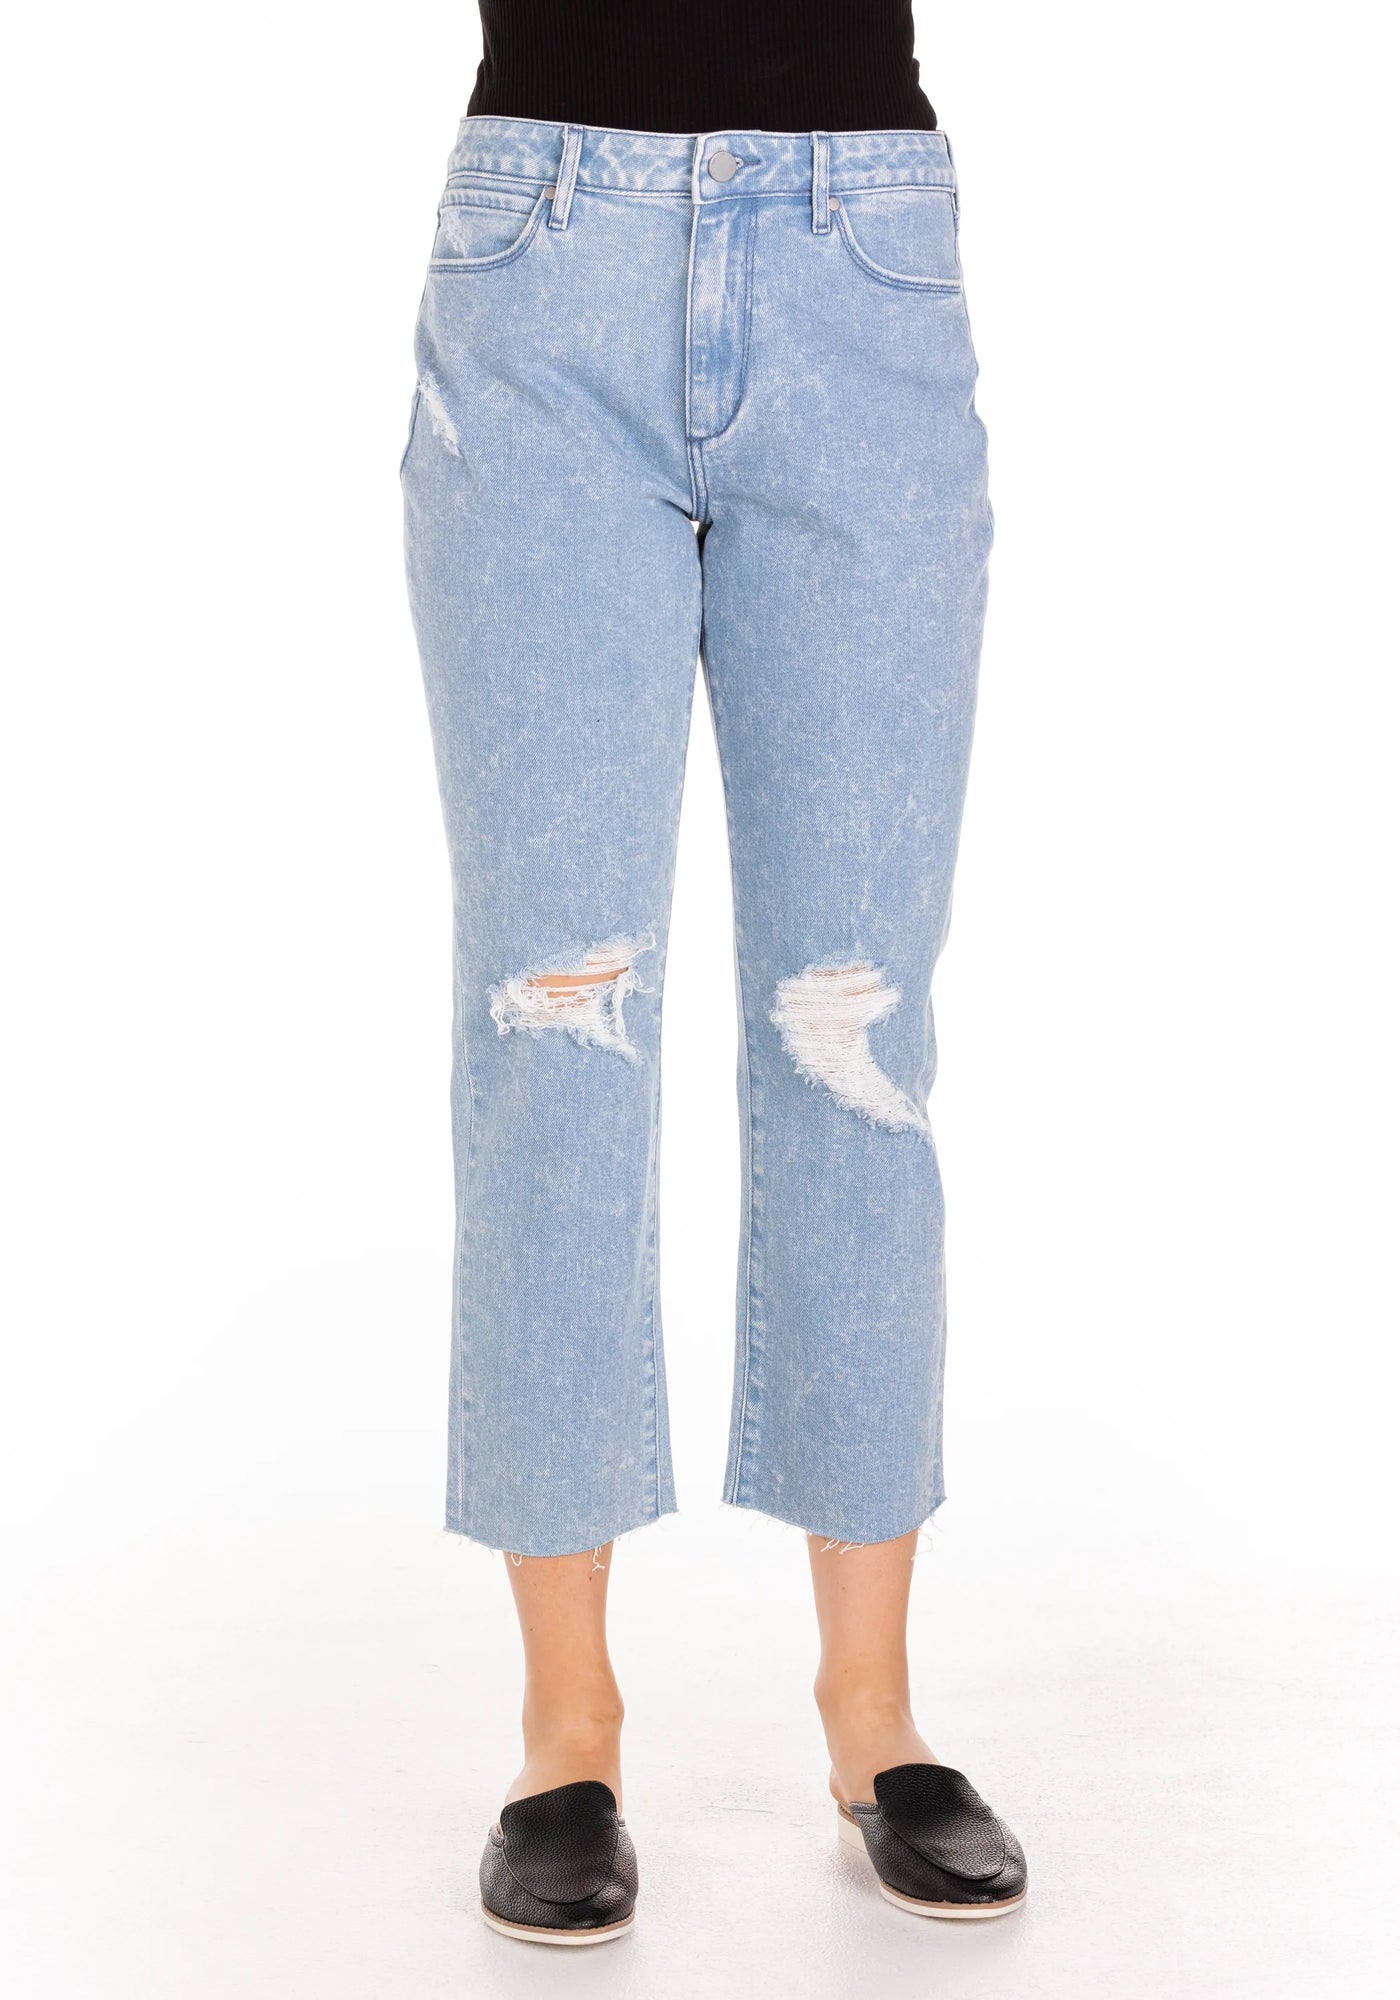 Articles of Society "Kate-Dorris" Cropped Jeans in Lightwash Final Sale